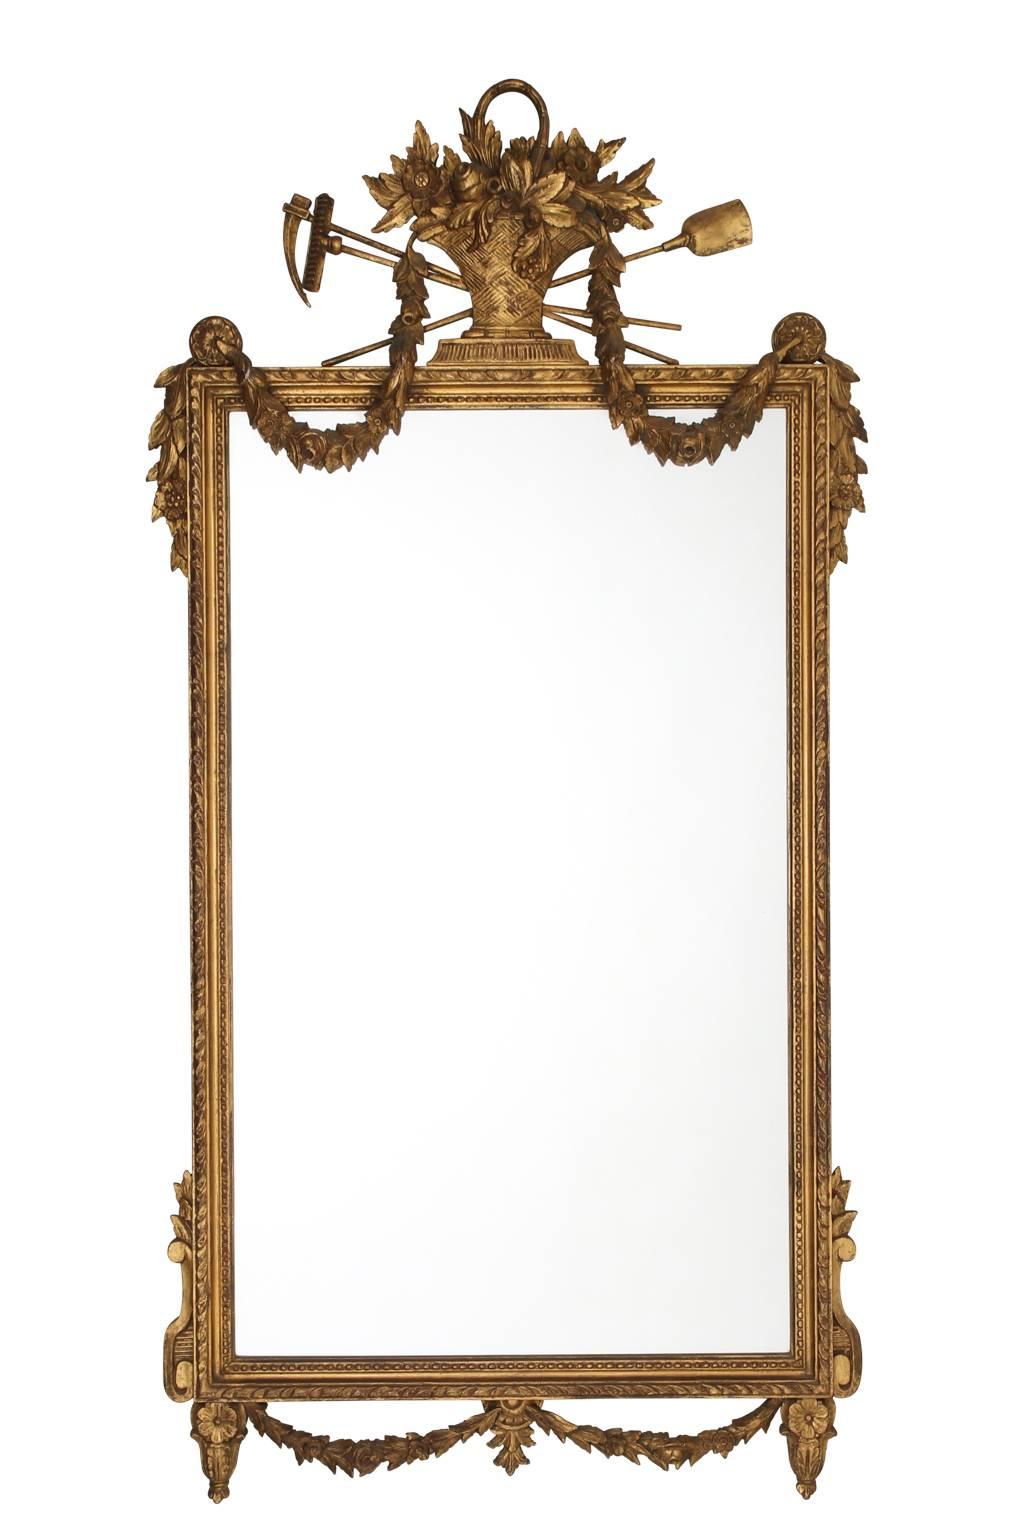 Pair of neoclassical style mirrors in gold gilt with a carved and decorated crown that features a basket of flowers and other garden harvest motifs, circa mid-20th century.
 